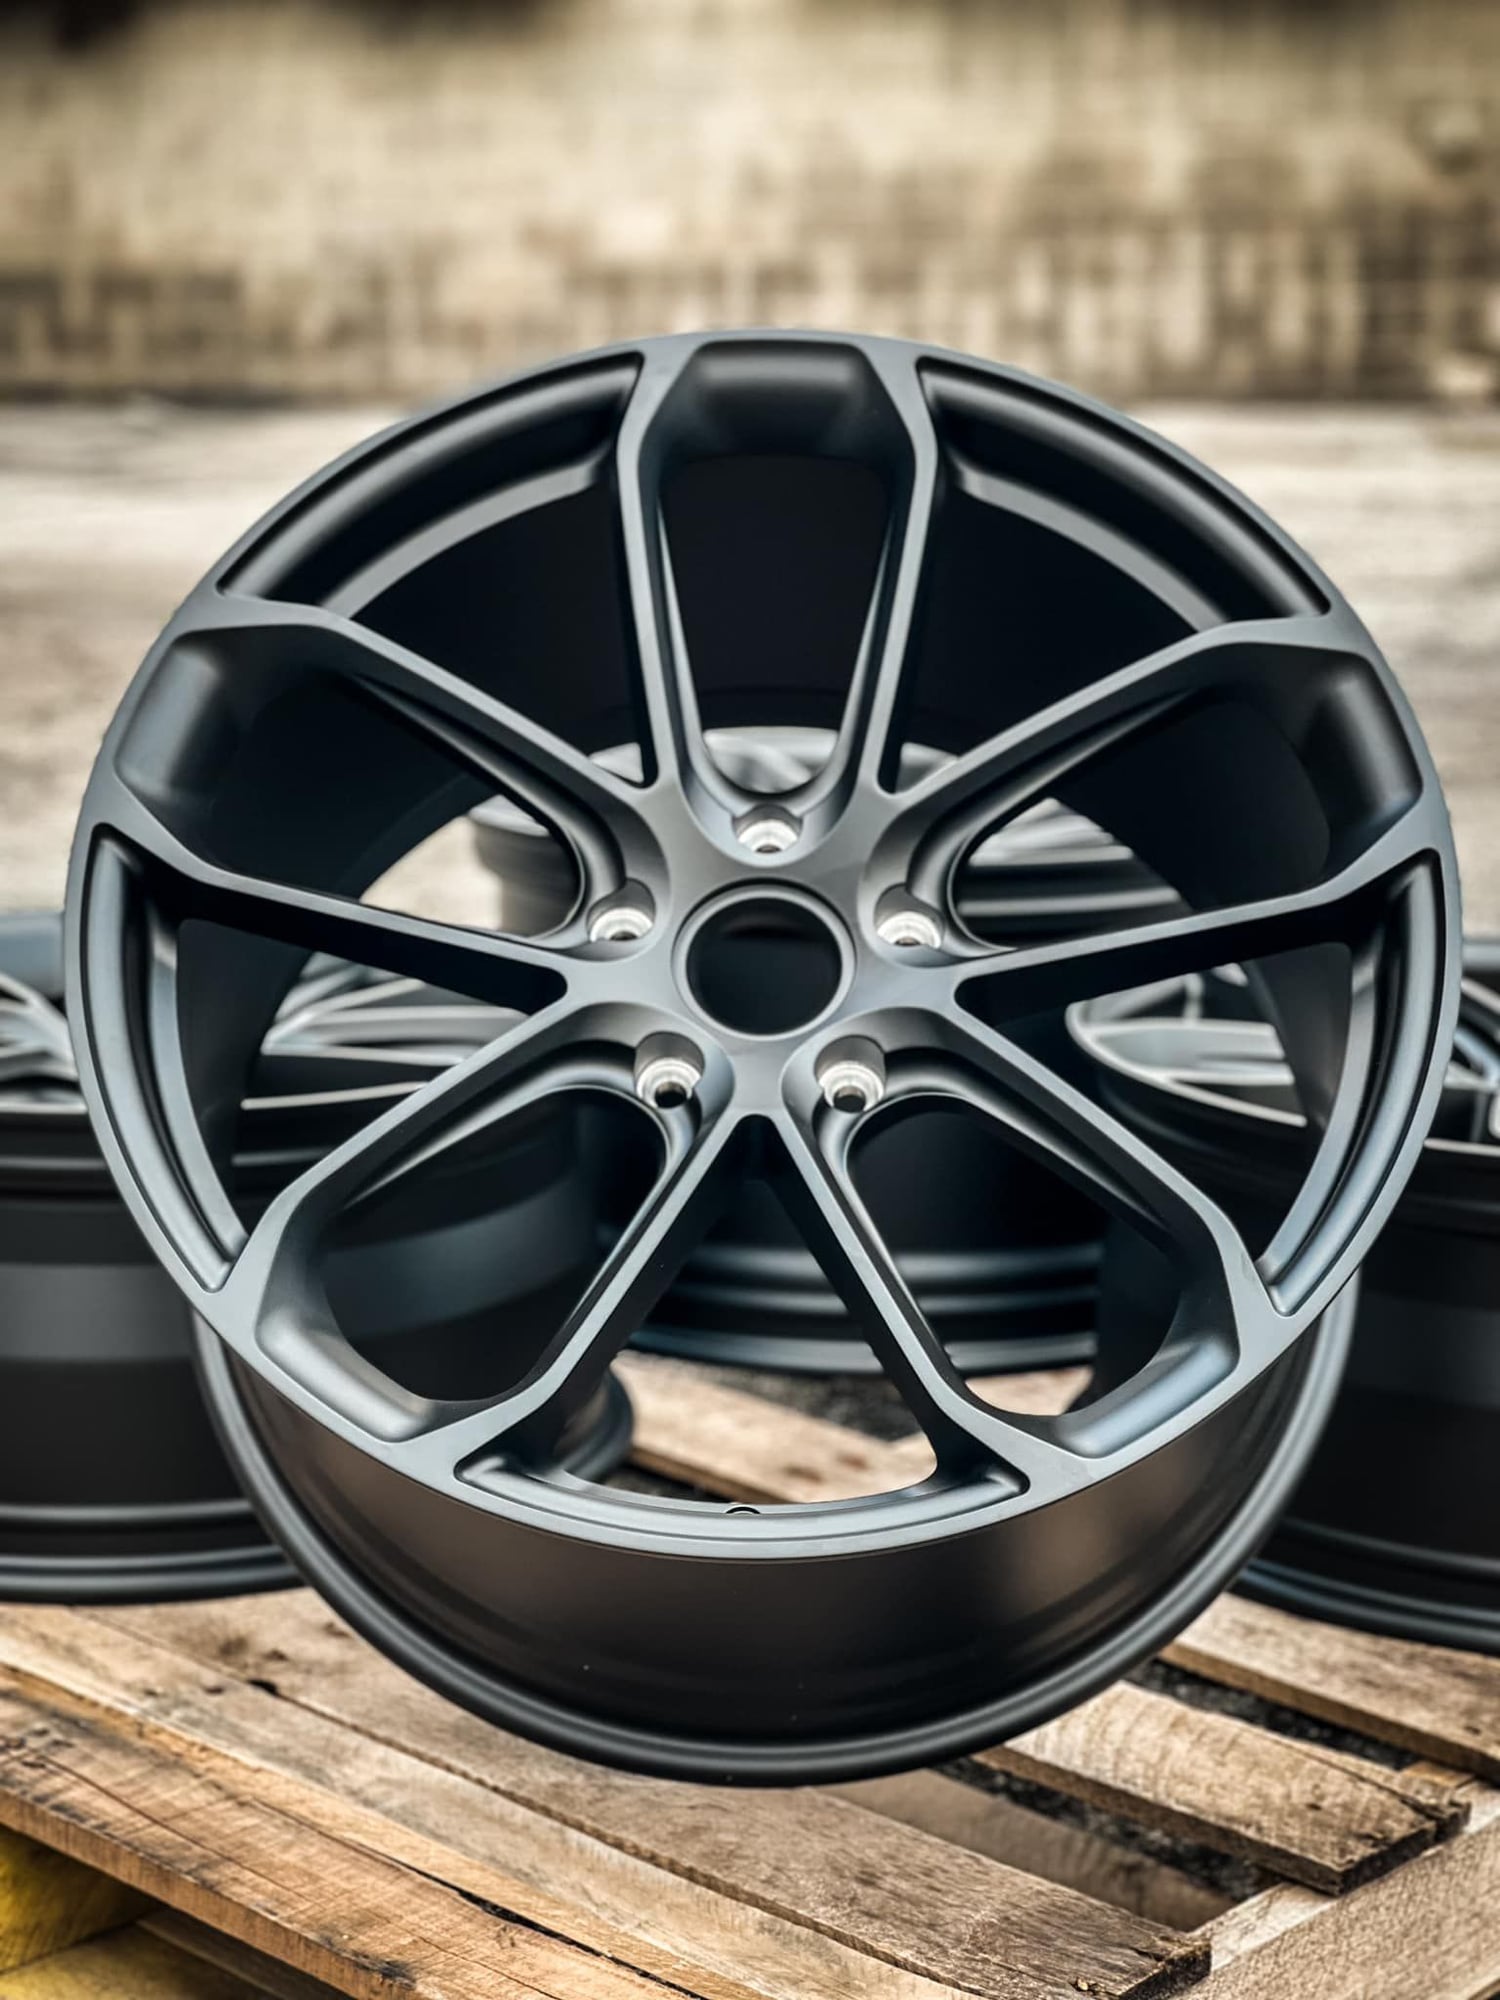 Wheels and Tires/Axles - 1pc Forged Turbo GT style wheels 22" for Cayenne - New - Commerce, CA 90040, United States